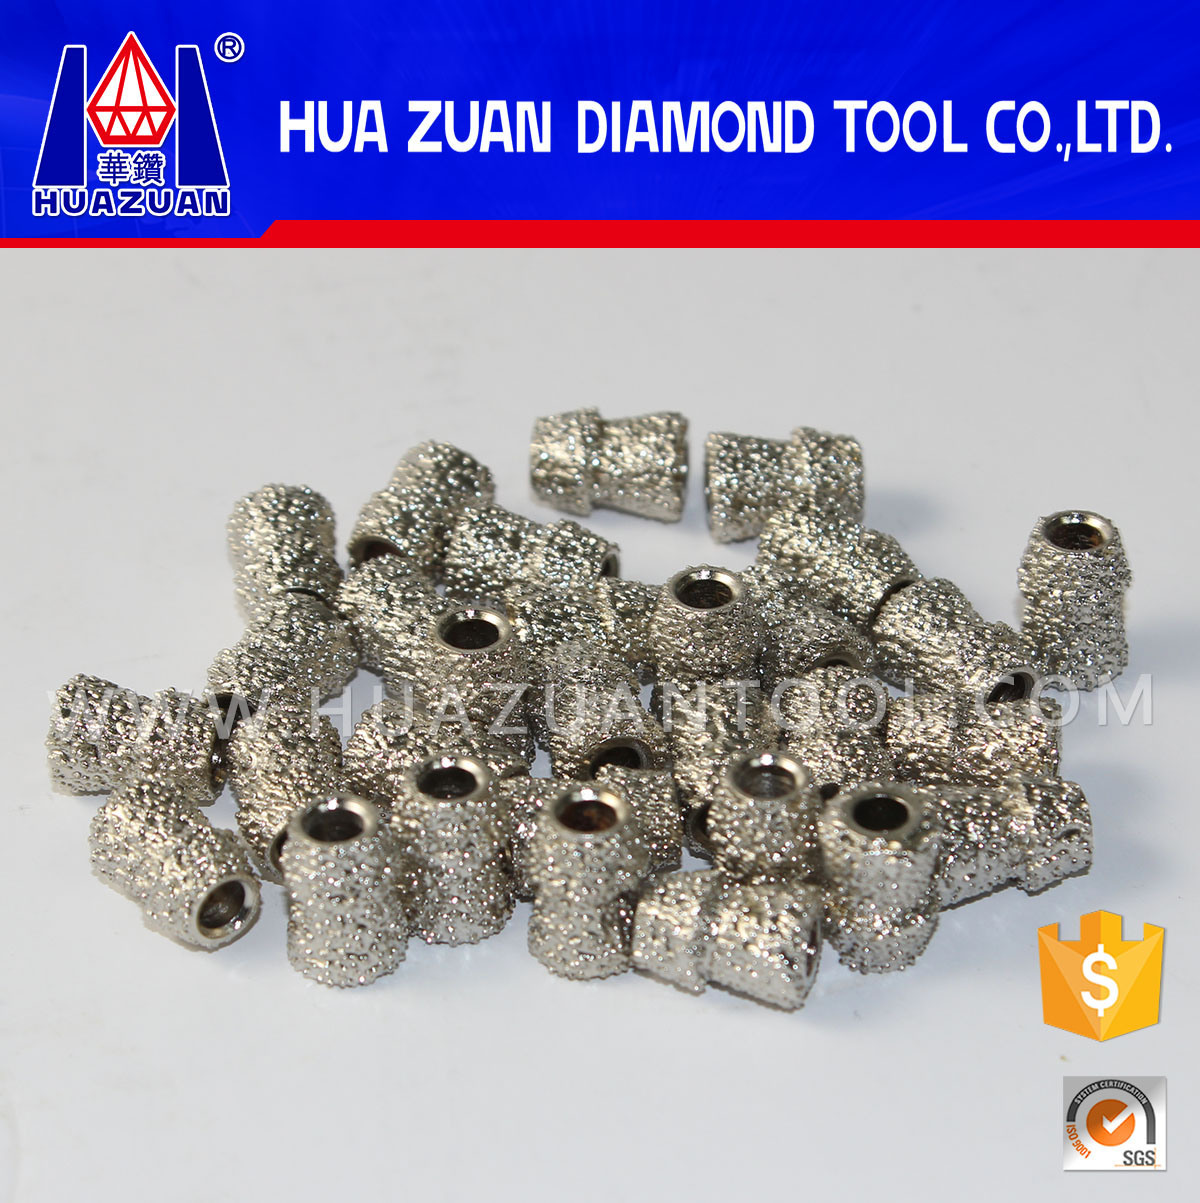 Diamond Wire Saw Beed for Stone Cutting